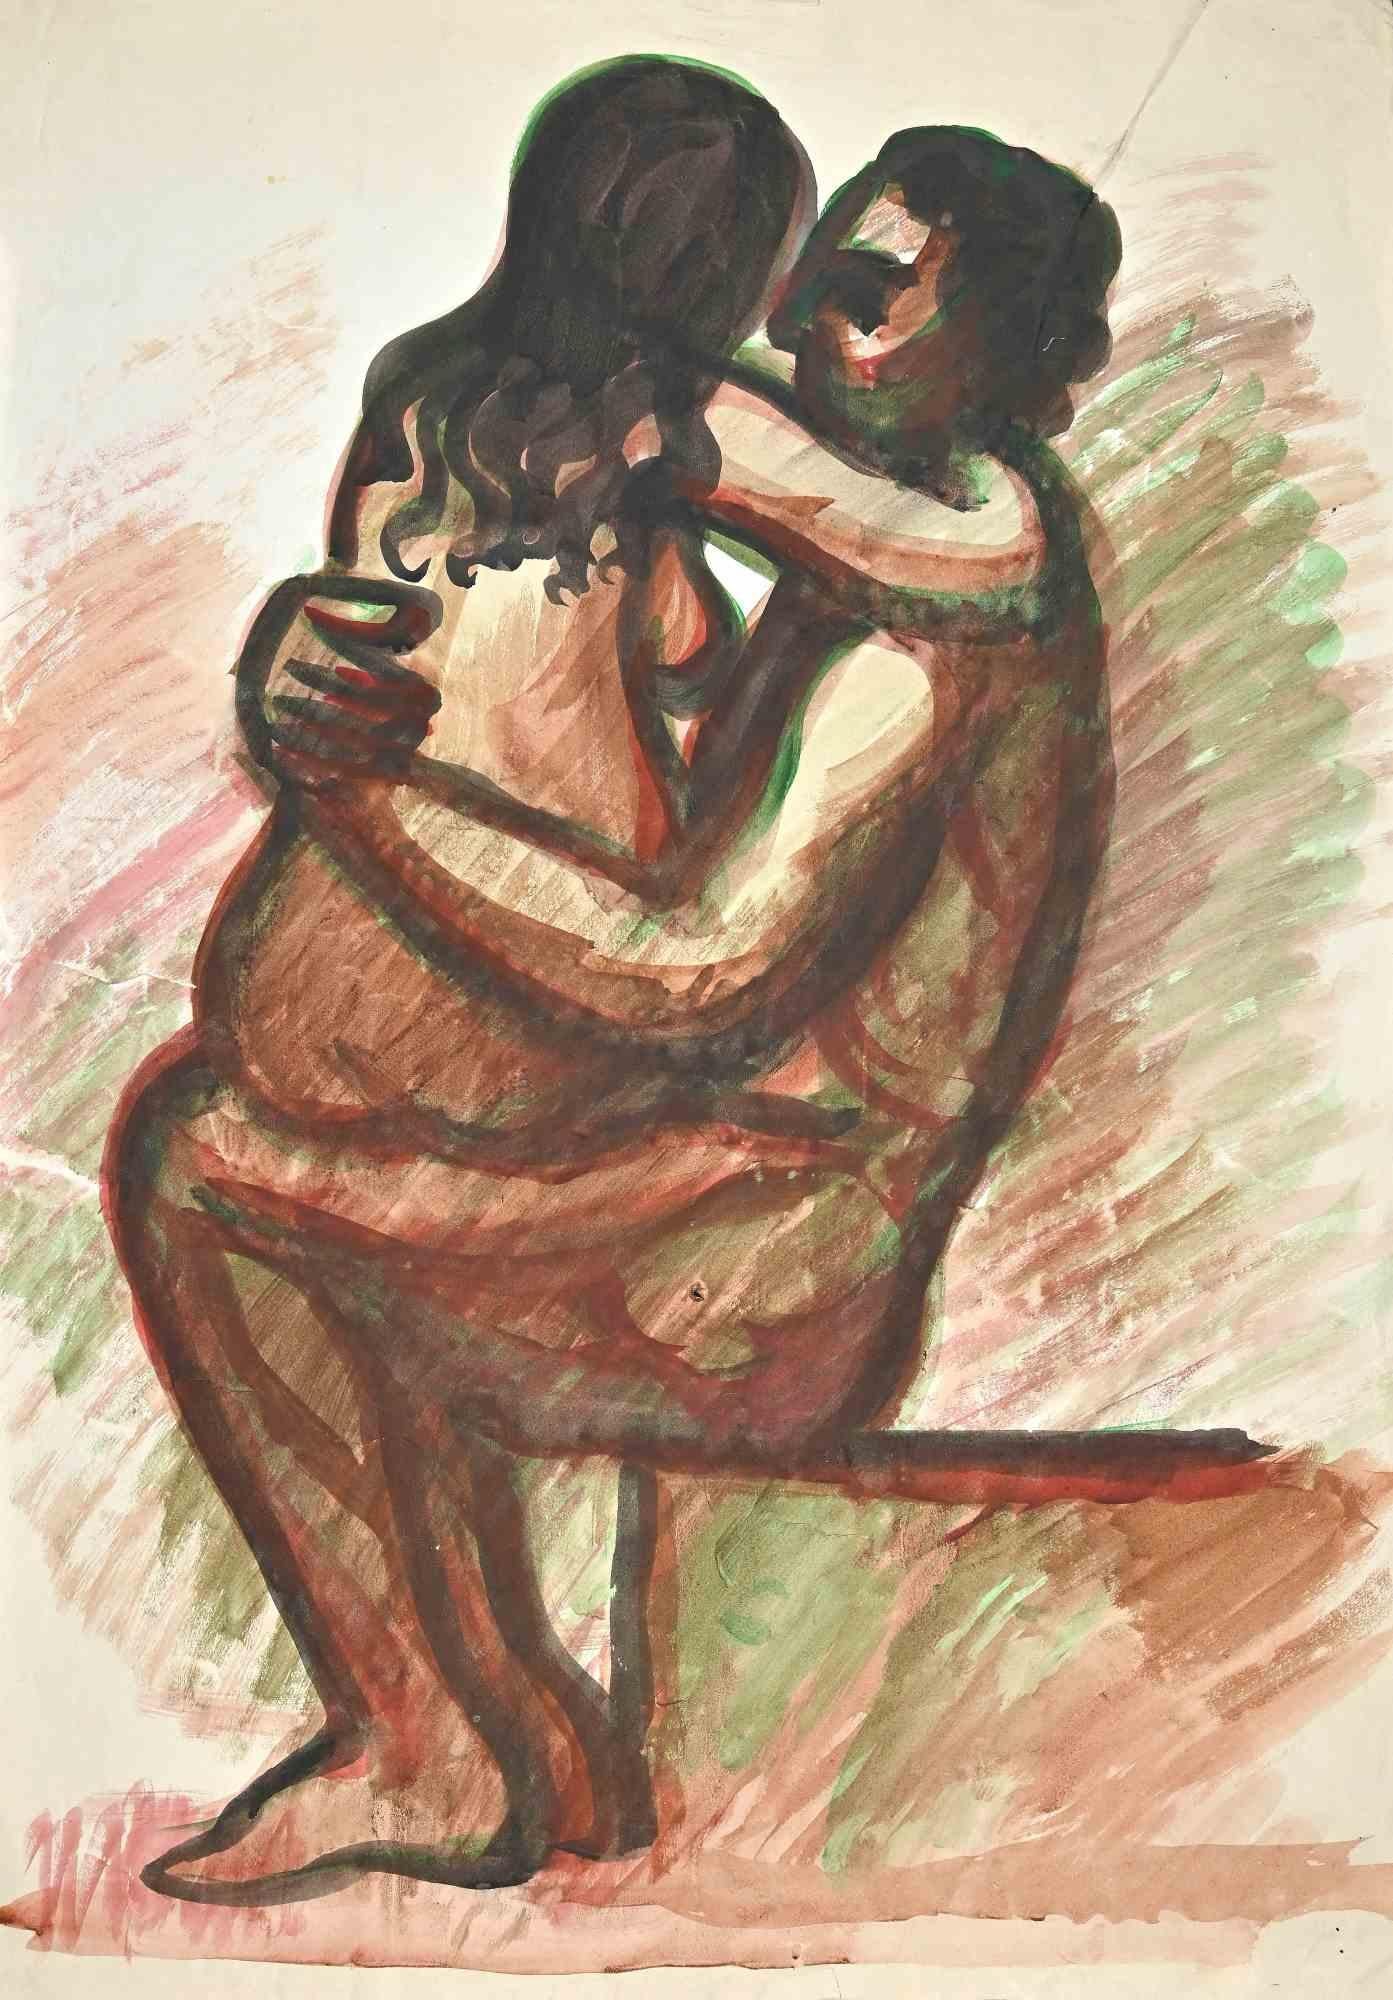 Love is a drawing in watercolor realized in the Mid-20th Century by Jean Delpech (1916-1988). 

Good conditions except for folding and cuts.

The artwork is realized in deft strokes and harmonious colors through mastery.

Jean-Raymond Delpech